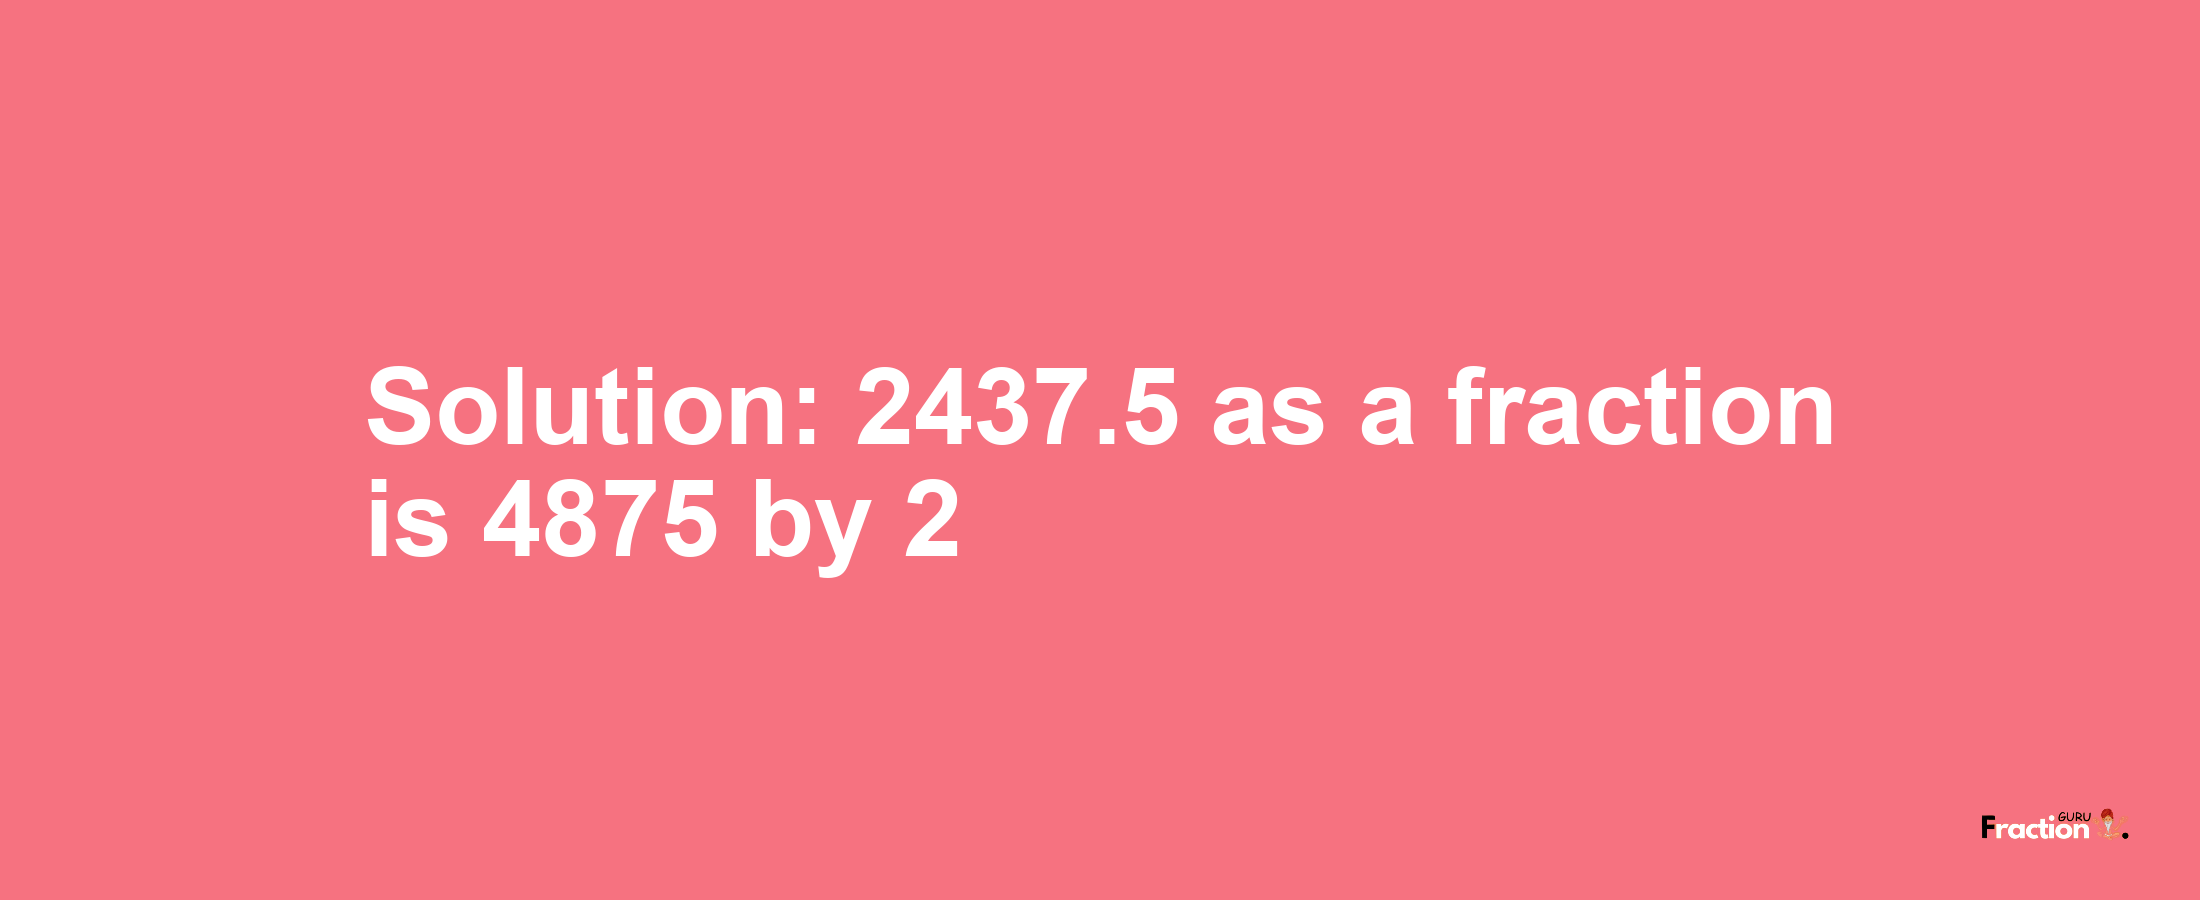 Solution:2437.5 as a fraction is 4875/2